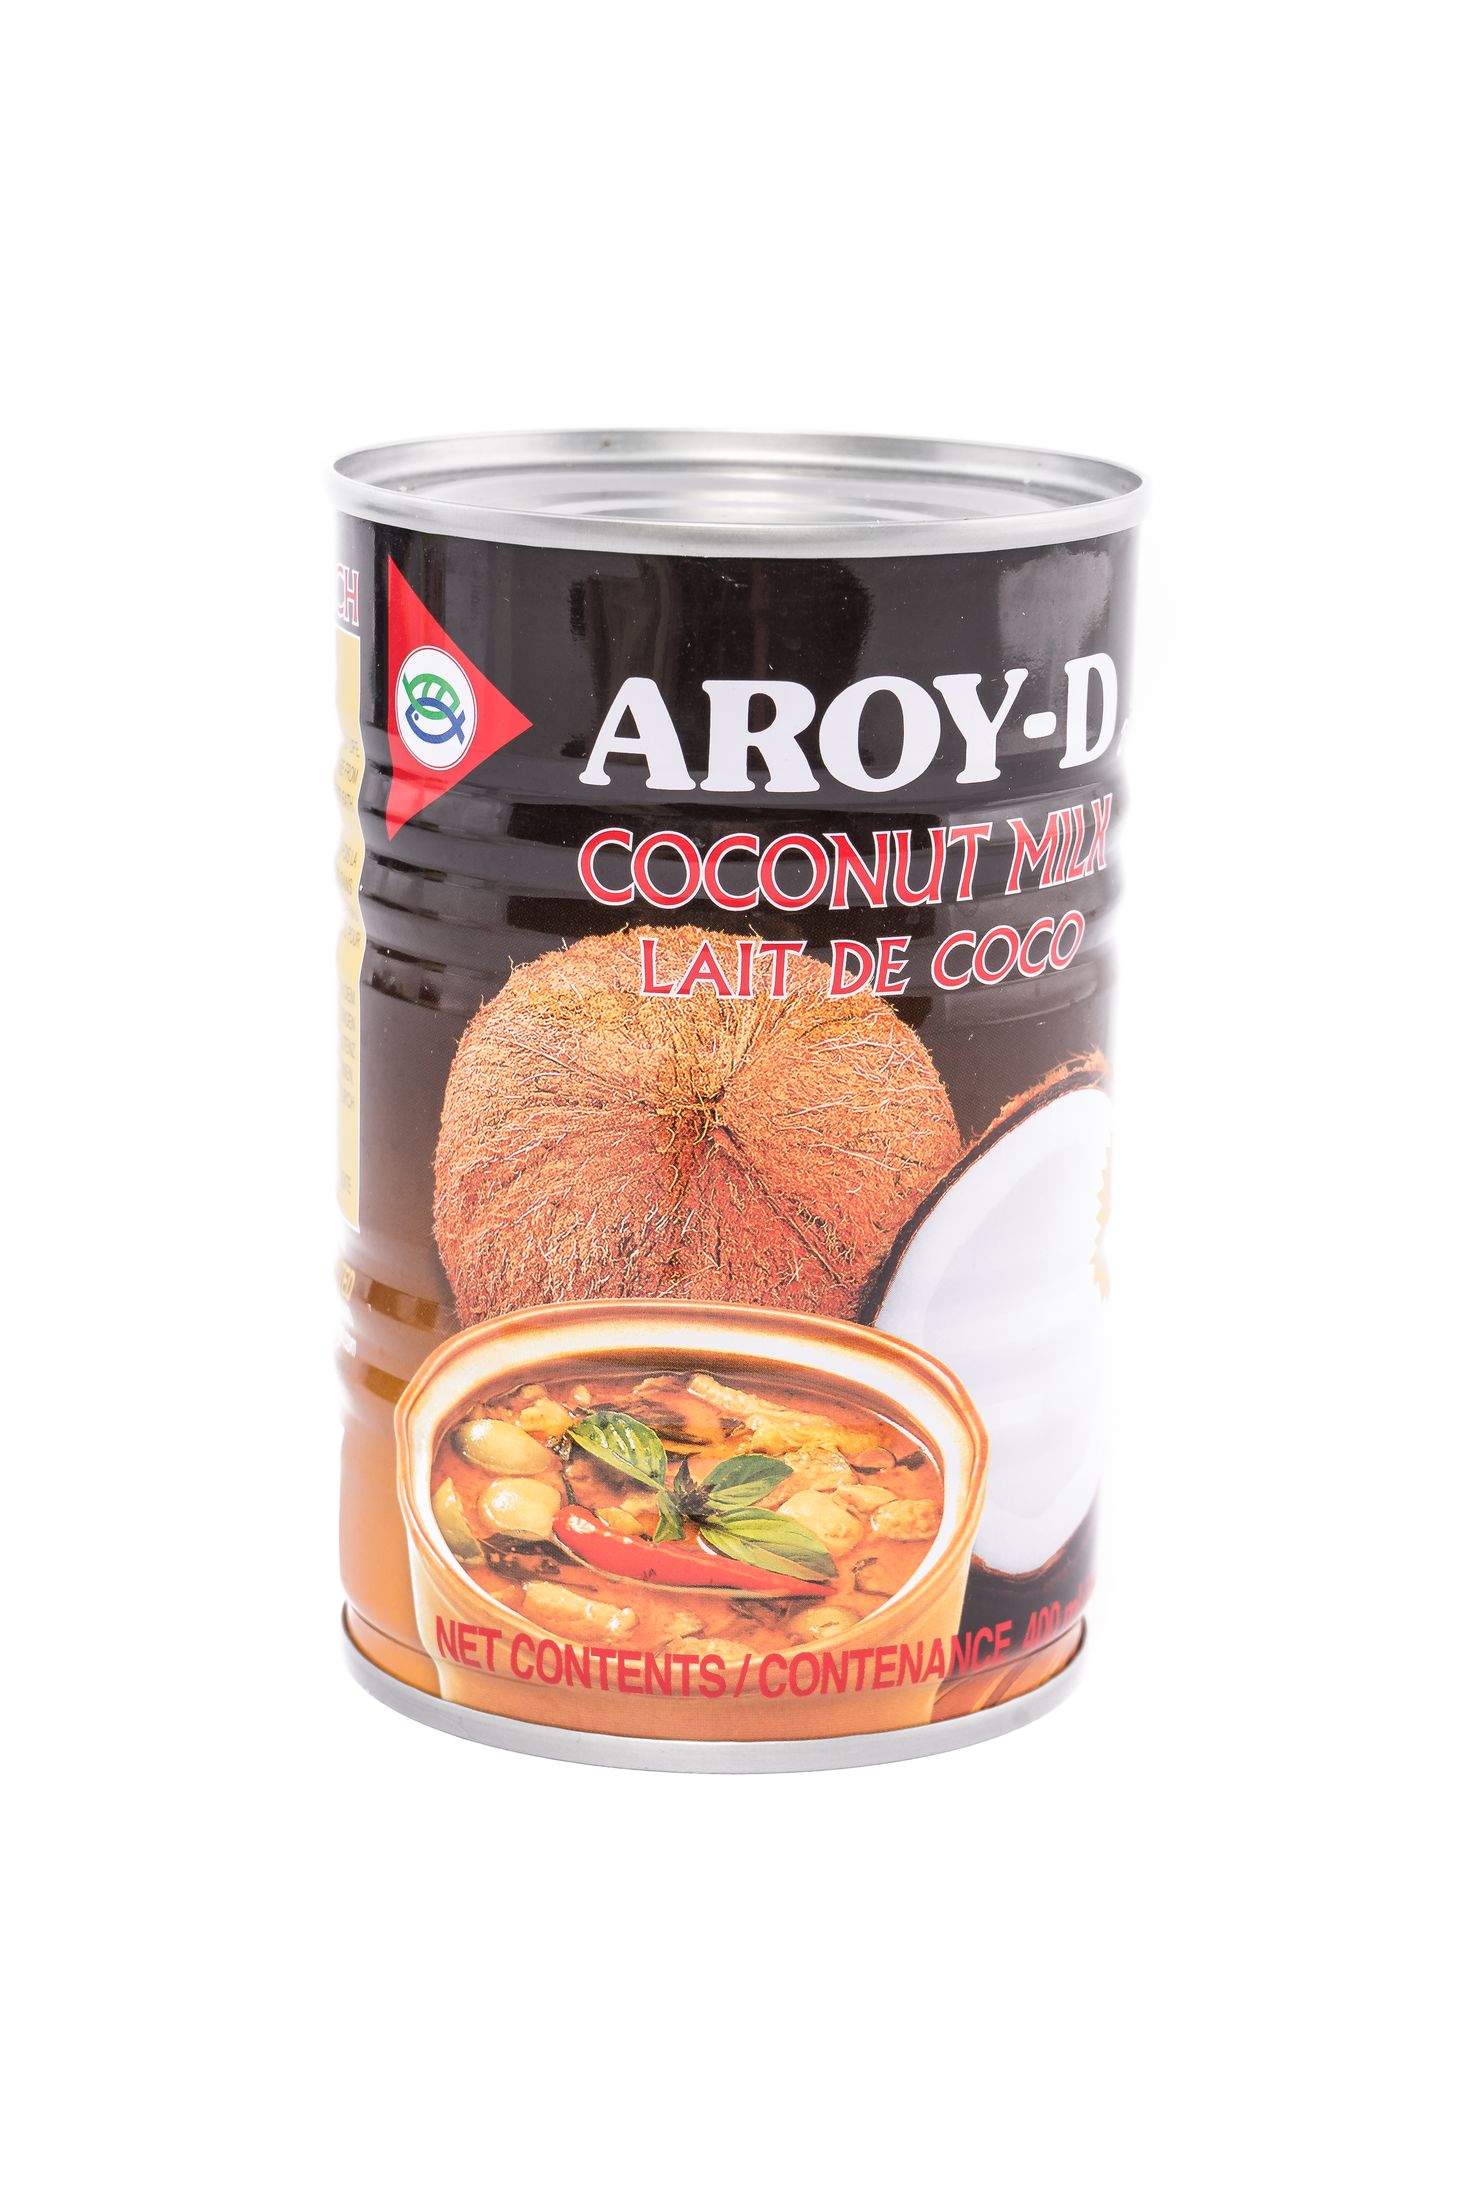 Coconut milk for cooking